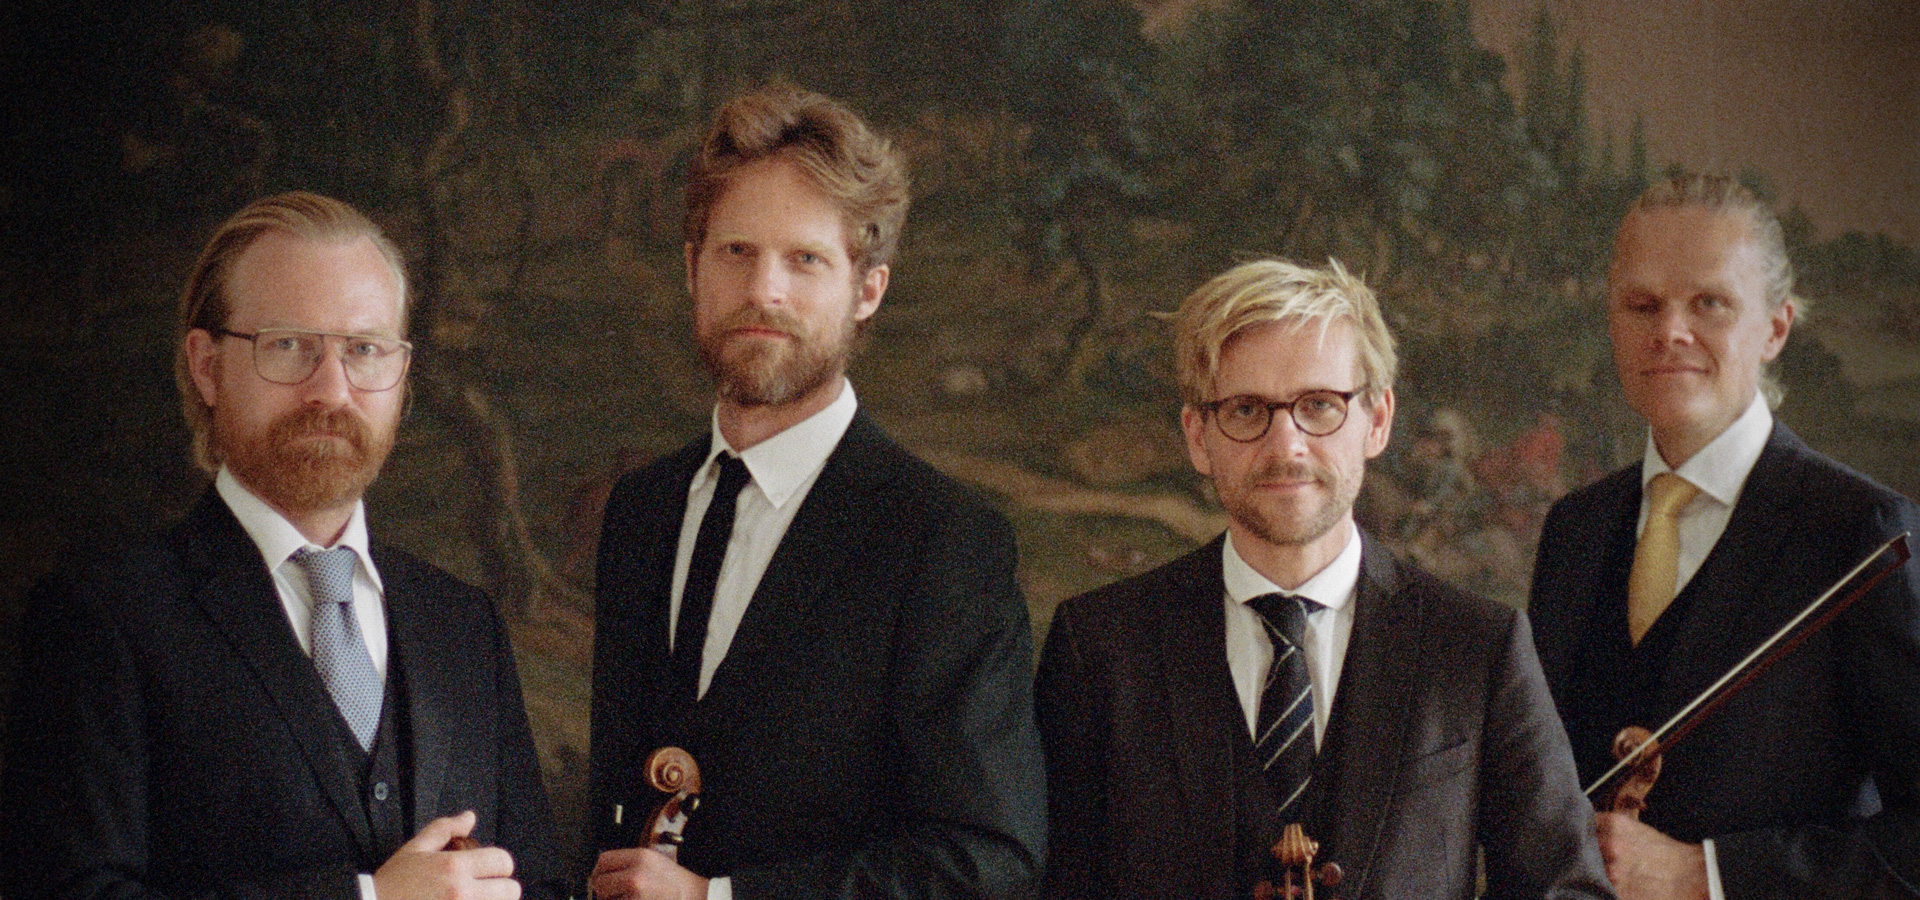 The four men of the Danish String stand next to each other holding their instruments, dressed in suits and ties.